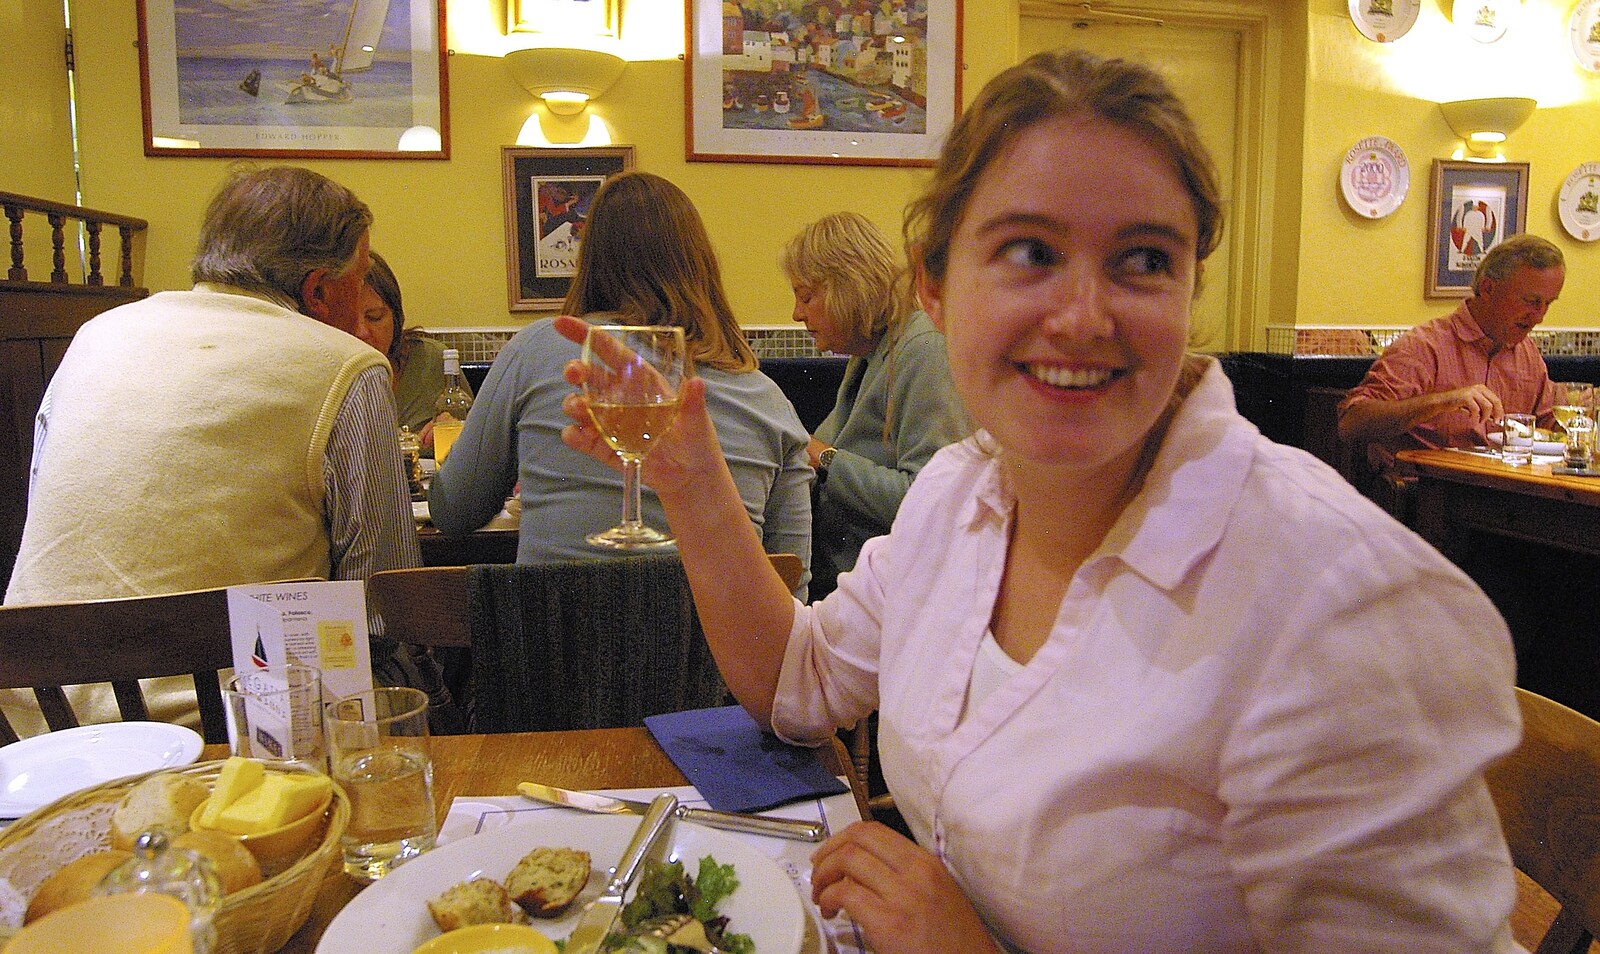 Isobel with a glass of white wine from The Regatta Restaurant with Mother and Mike, Aldeburgh, Suffolk - 10th August 2006